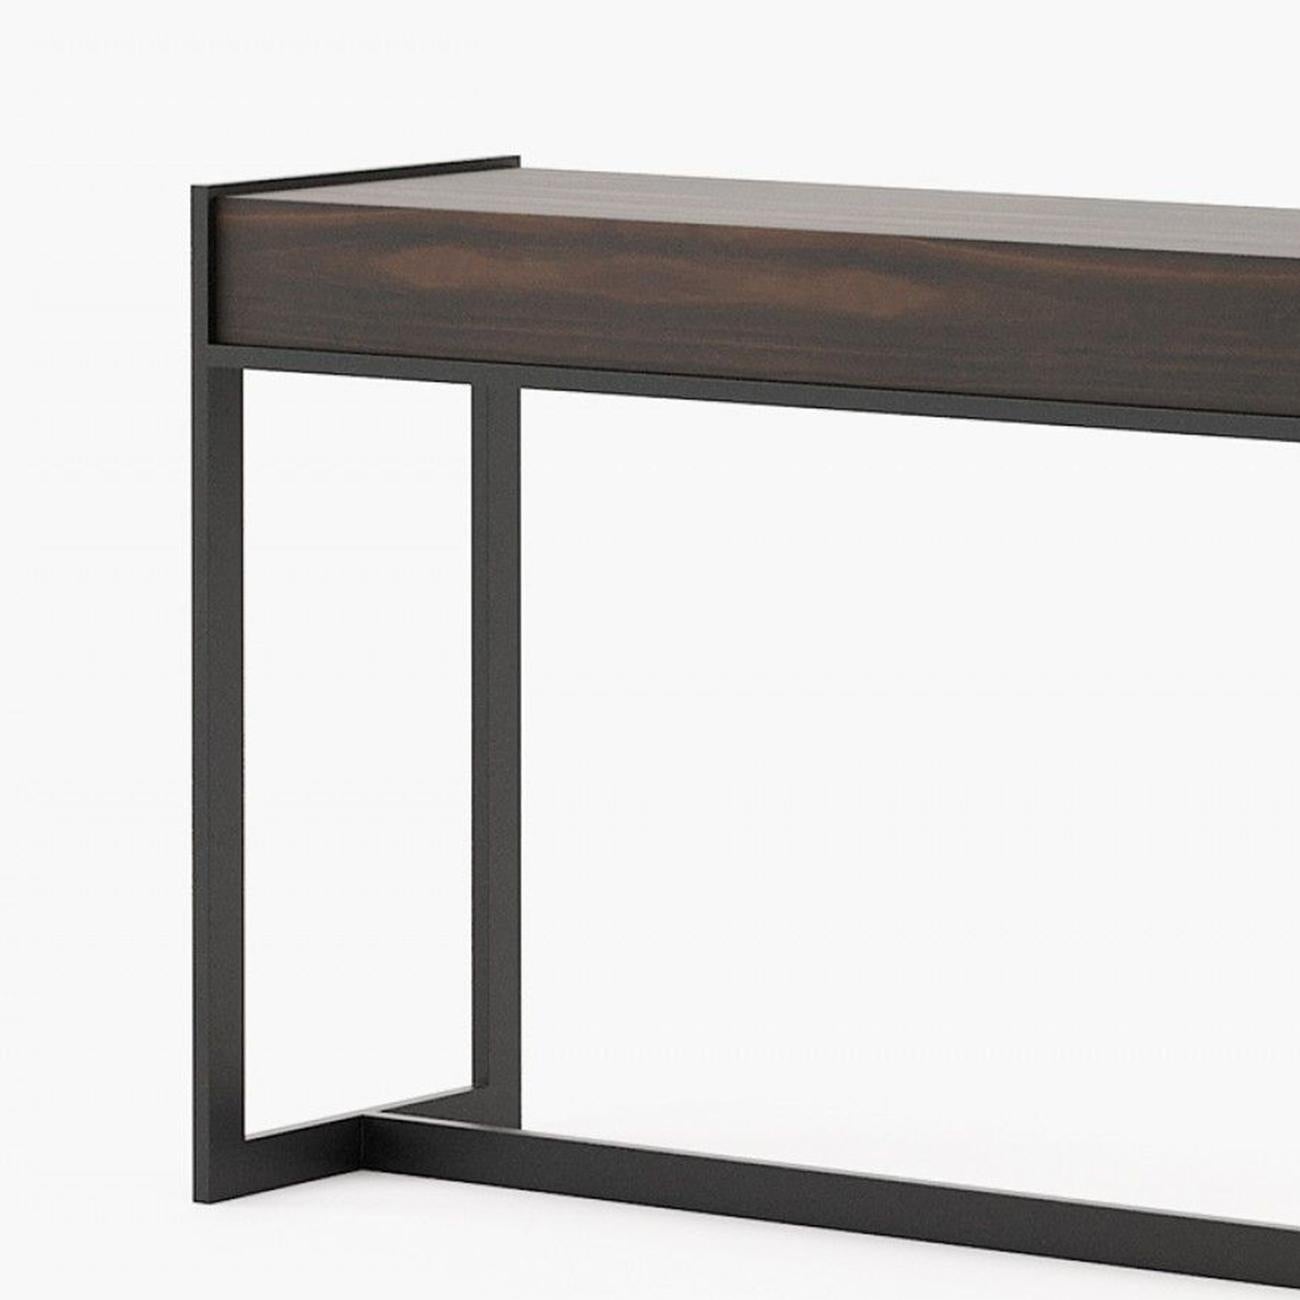 Spanish Tanja Wood Console Table For Sale